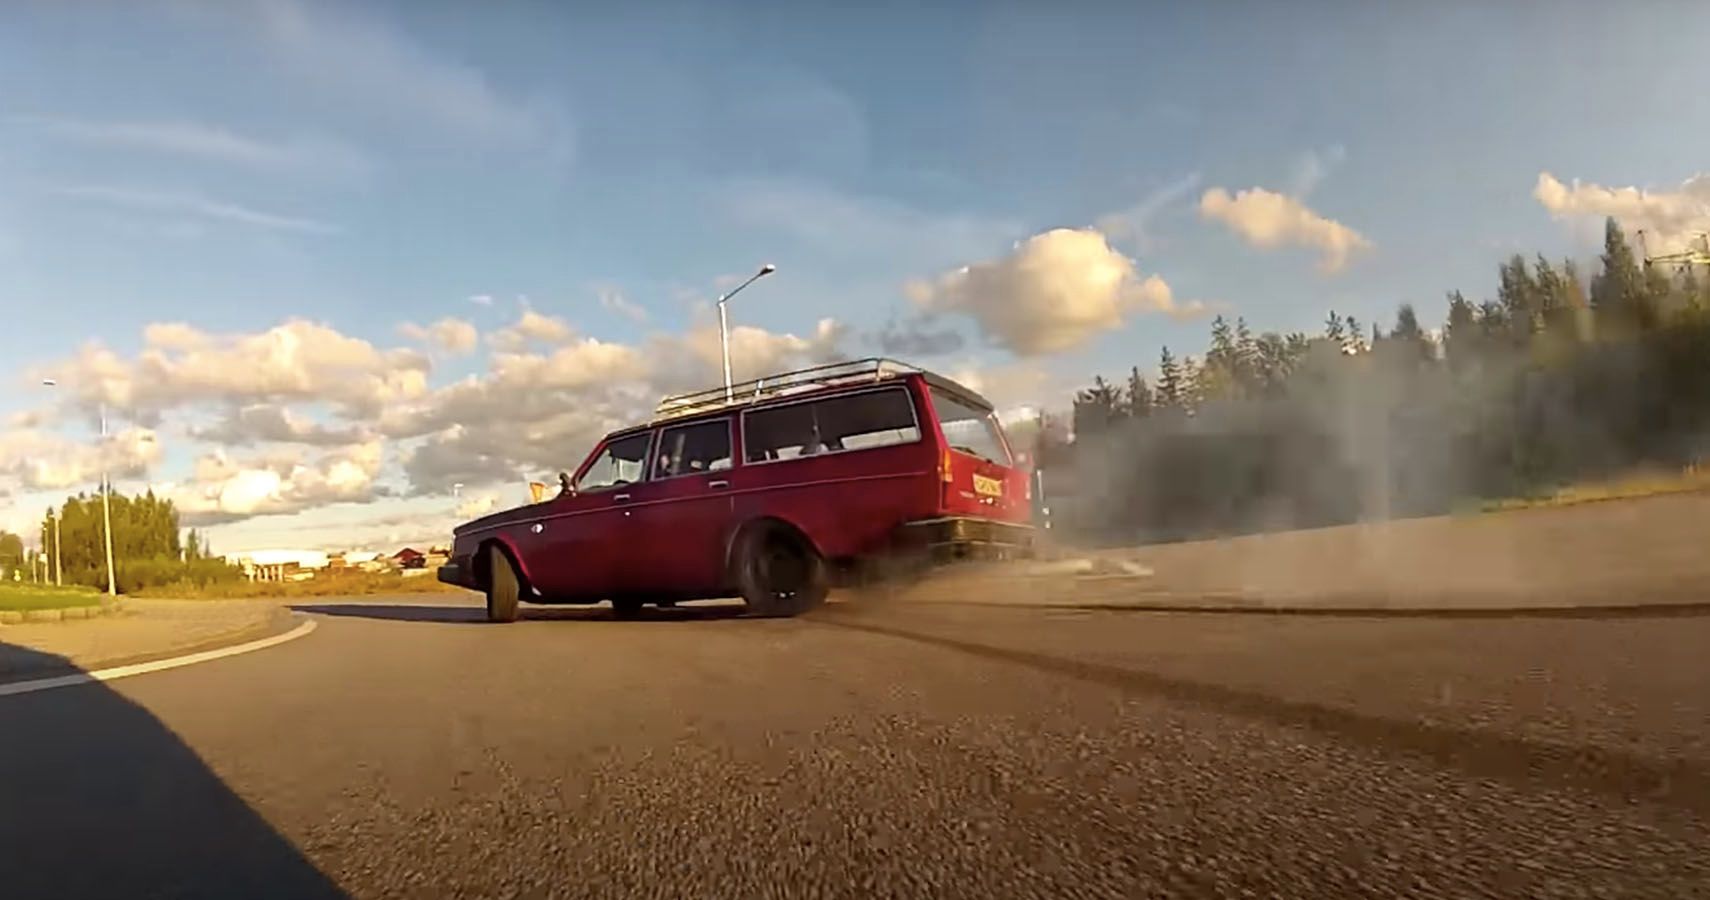 Watch This Insane Lambo V10-Swapped Volvo Do Donuts And Get A New Clutch